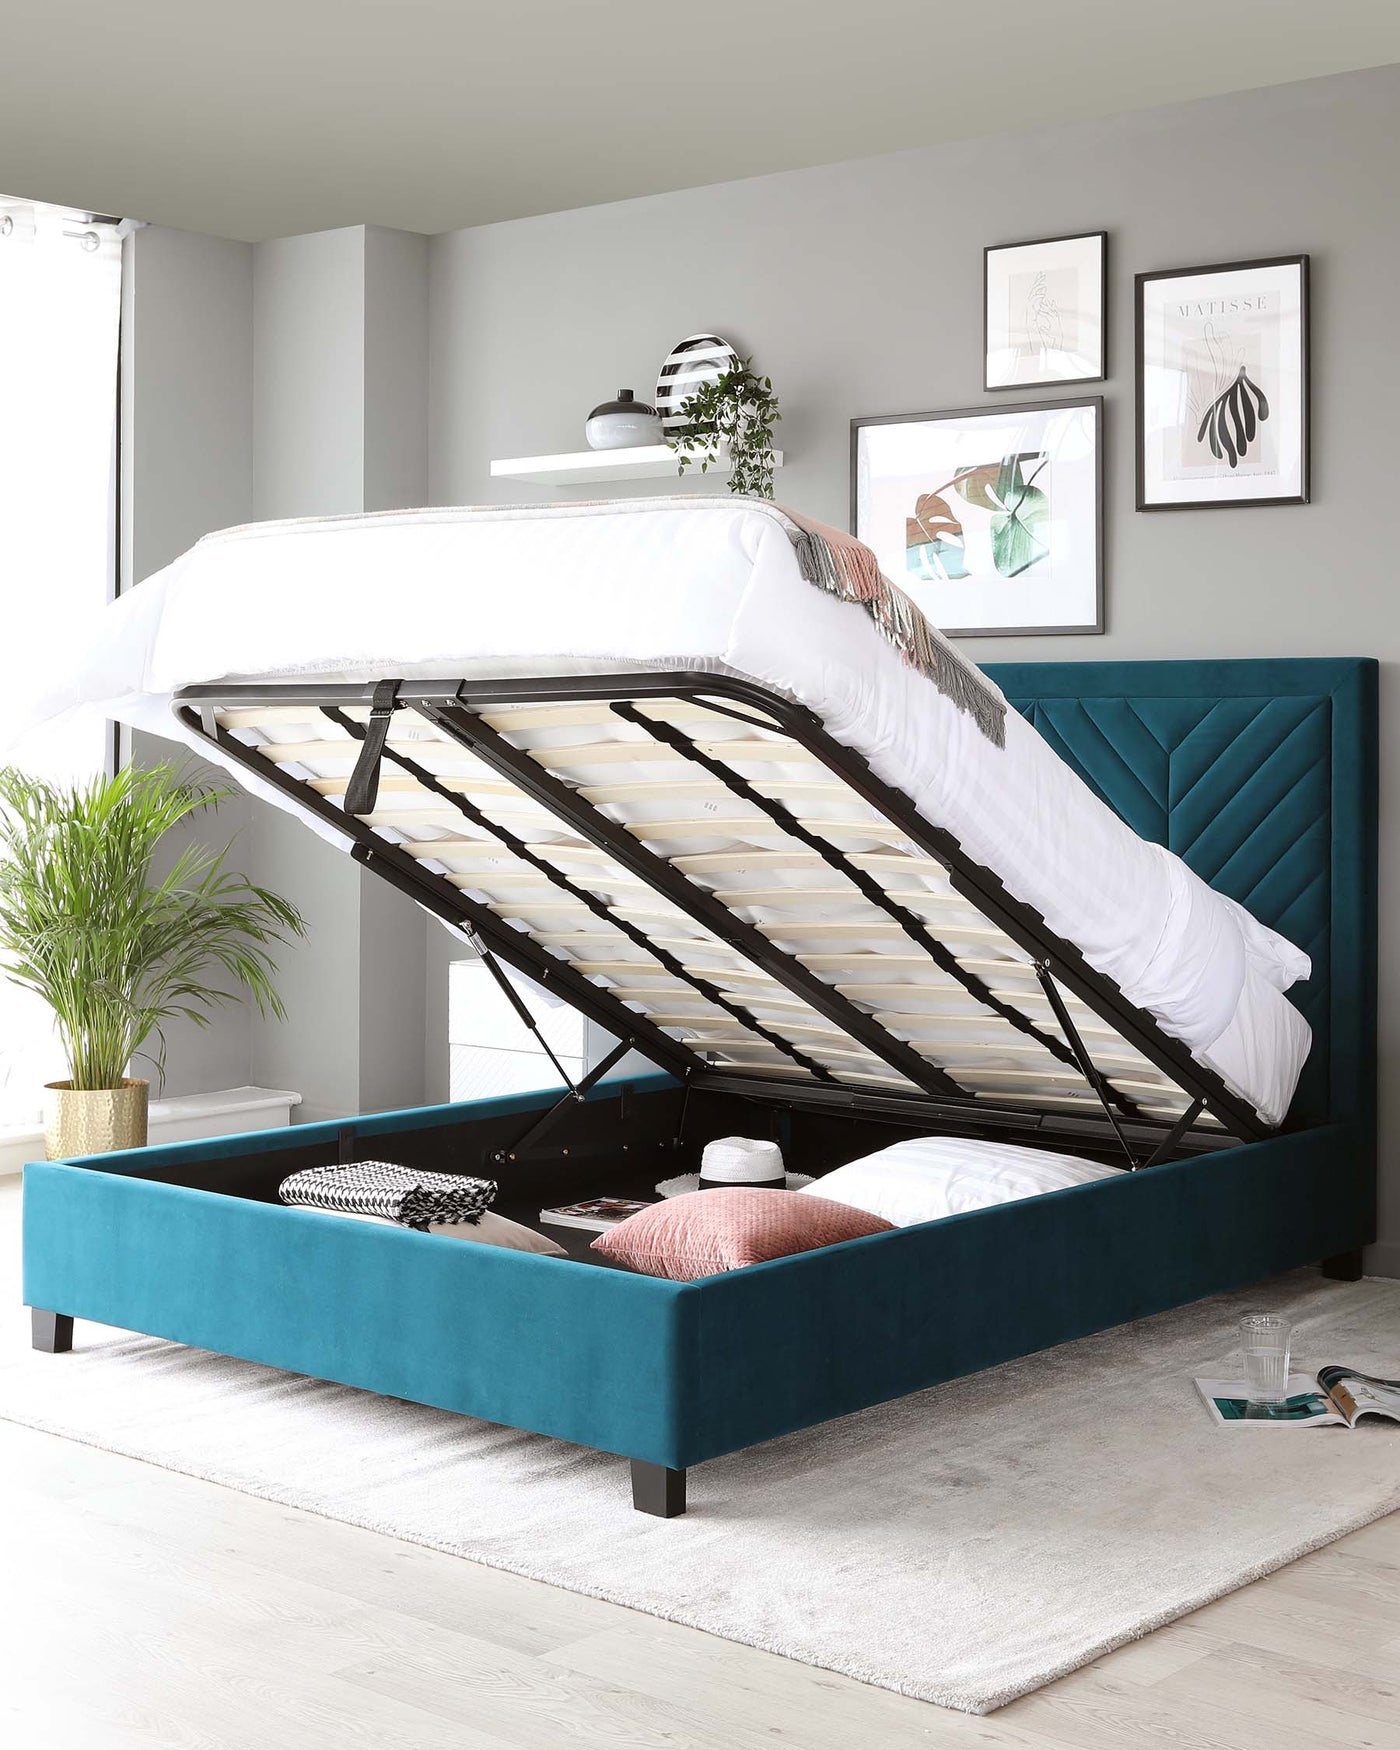 A contemporary teal upholstered storage bed with a lifted mattress base revealing internal storage, set against a neutral grey wall in a well-lit room. The headboard features a tufted vertical channel design, and the bed stands on dark wooden legs. The bedding includes white linens partially draped aside, and nearby accent pillows rest inside the open storage space. A potted plant adds a touch of greenery to the space.